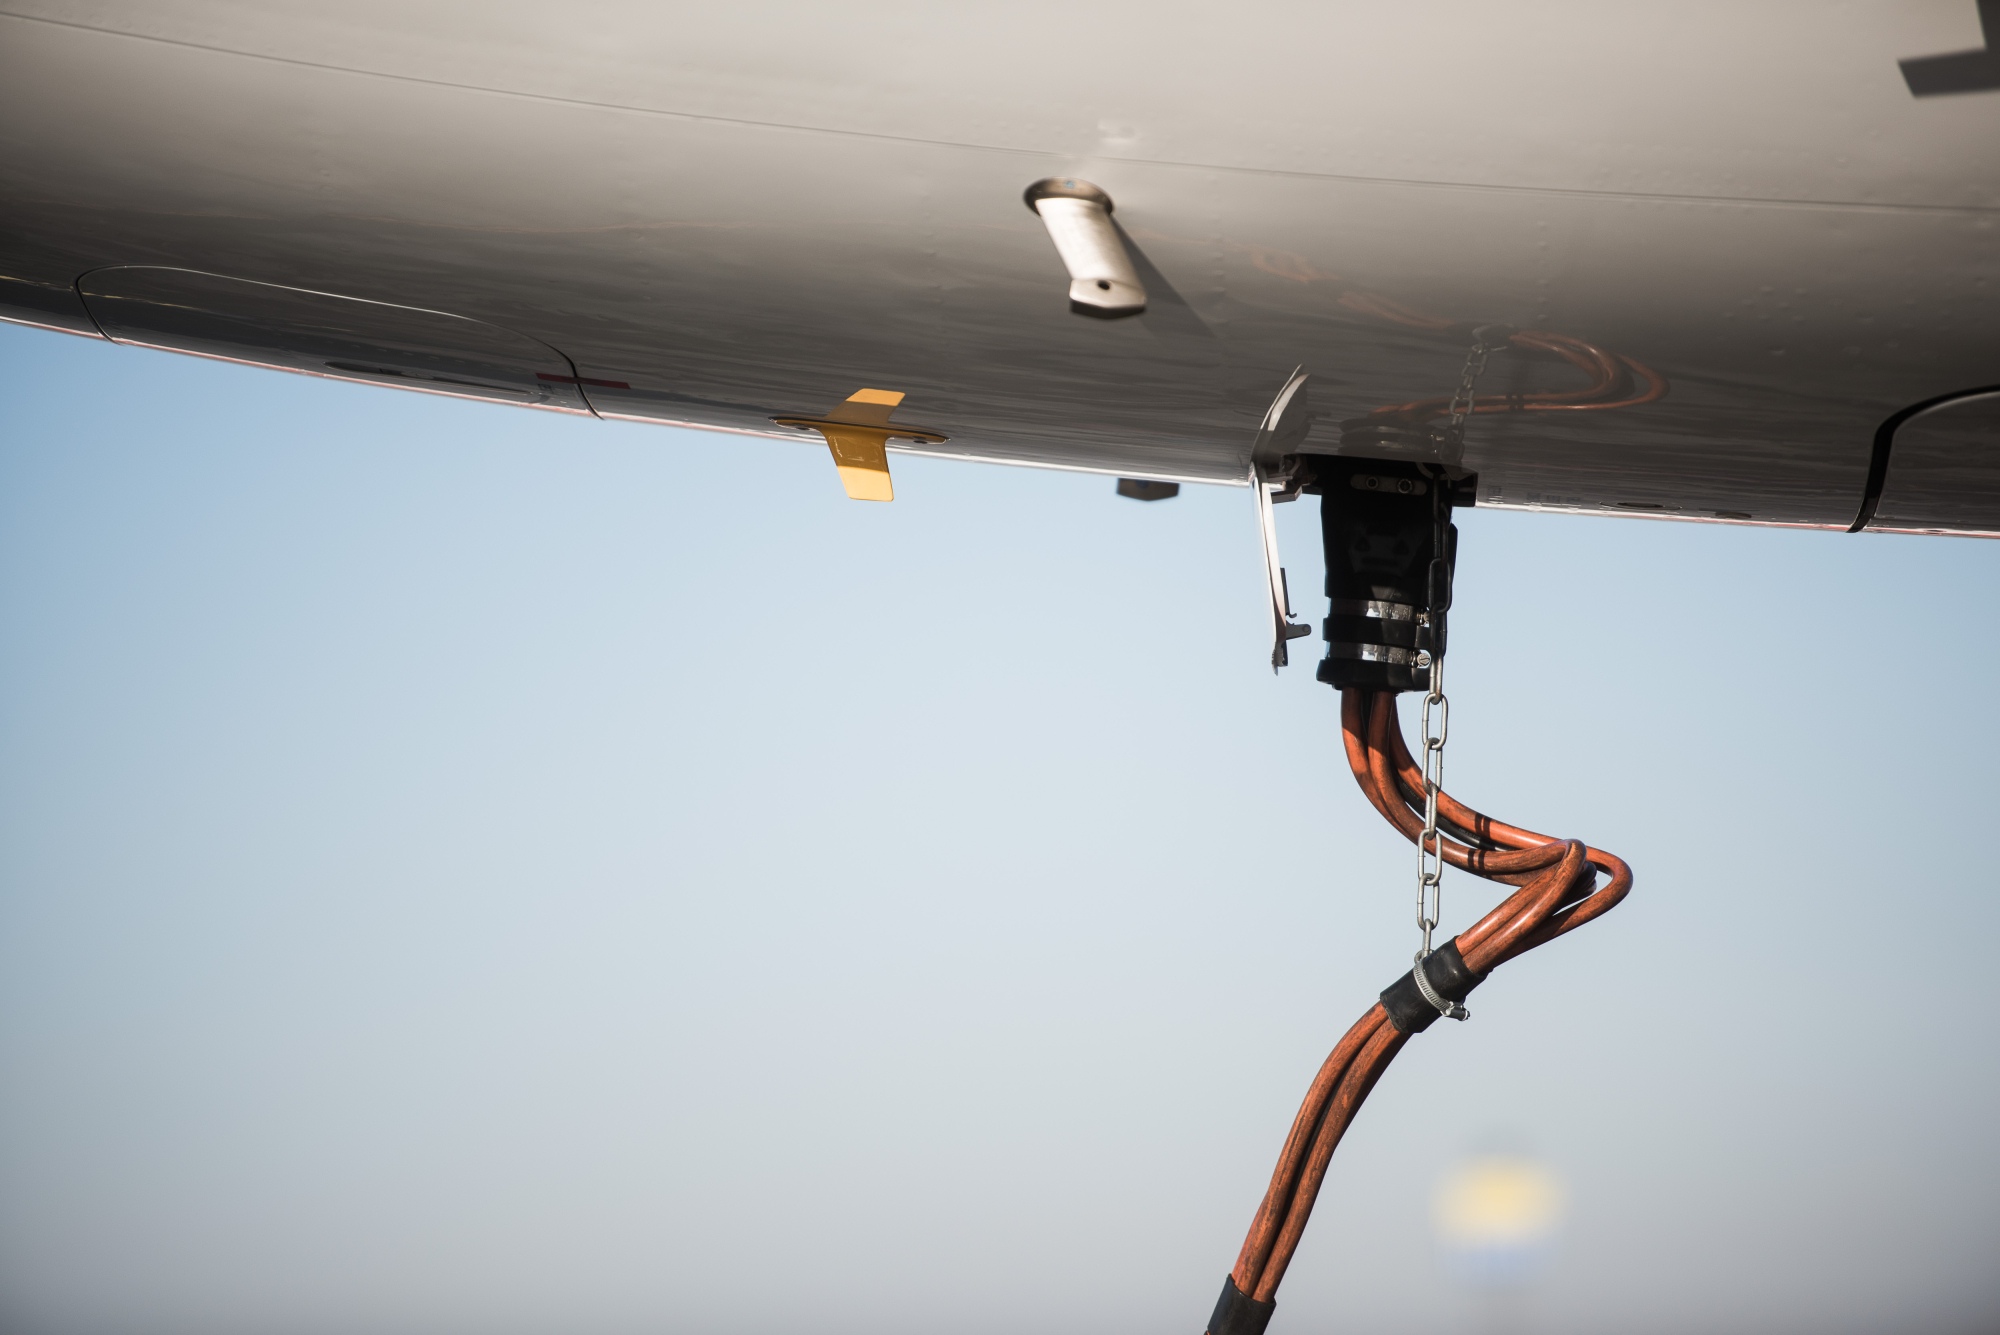 Some sustainable aviation fuel aim to make greener jet fuel from corn-based ethanol.